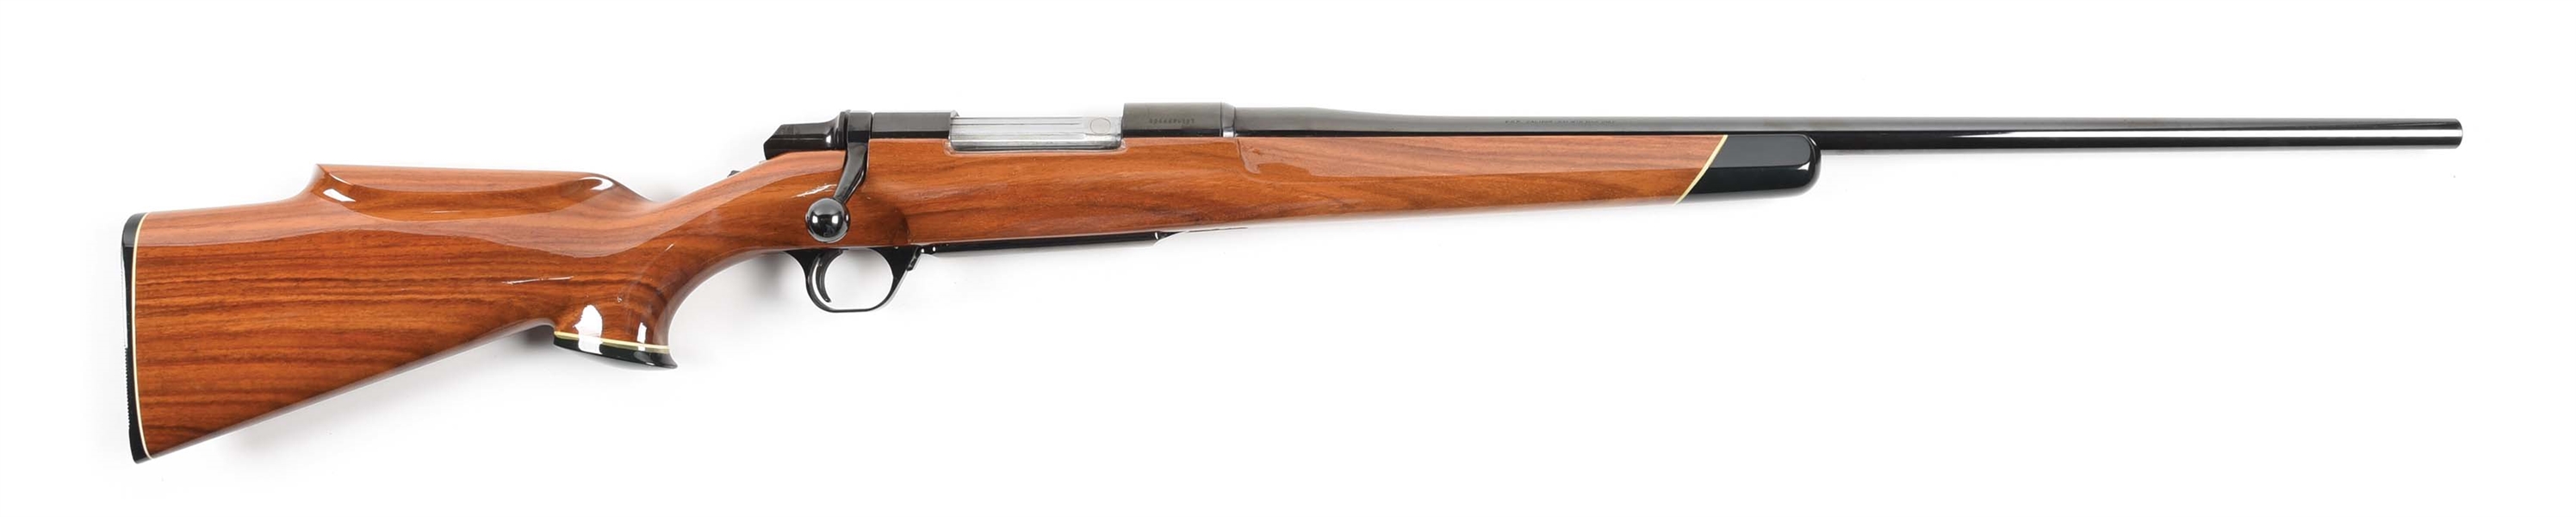 (M) BROWNING BBR BOLT ACTION RIFLE WITH SAPELE STOCK.